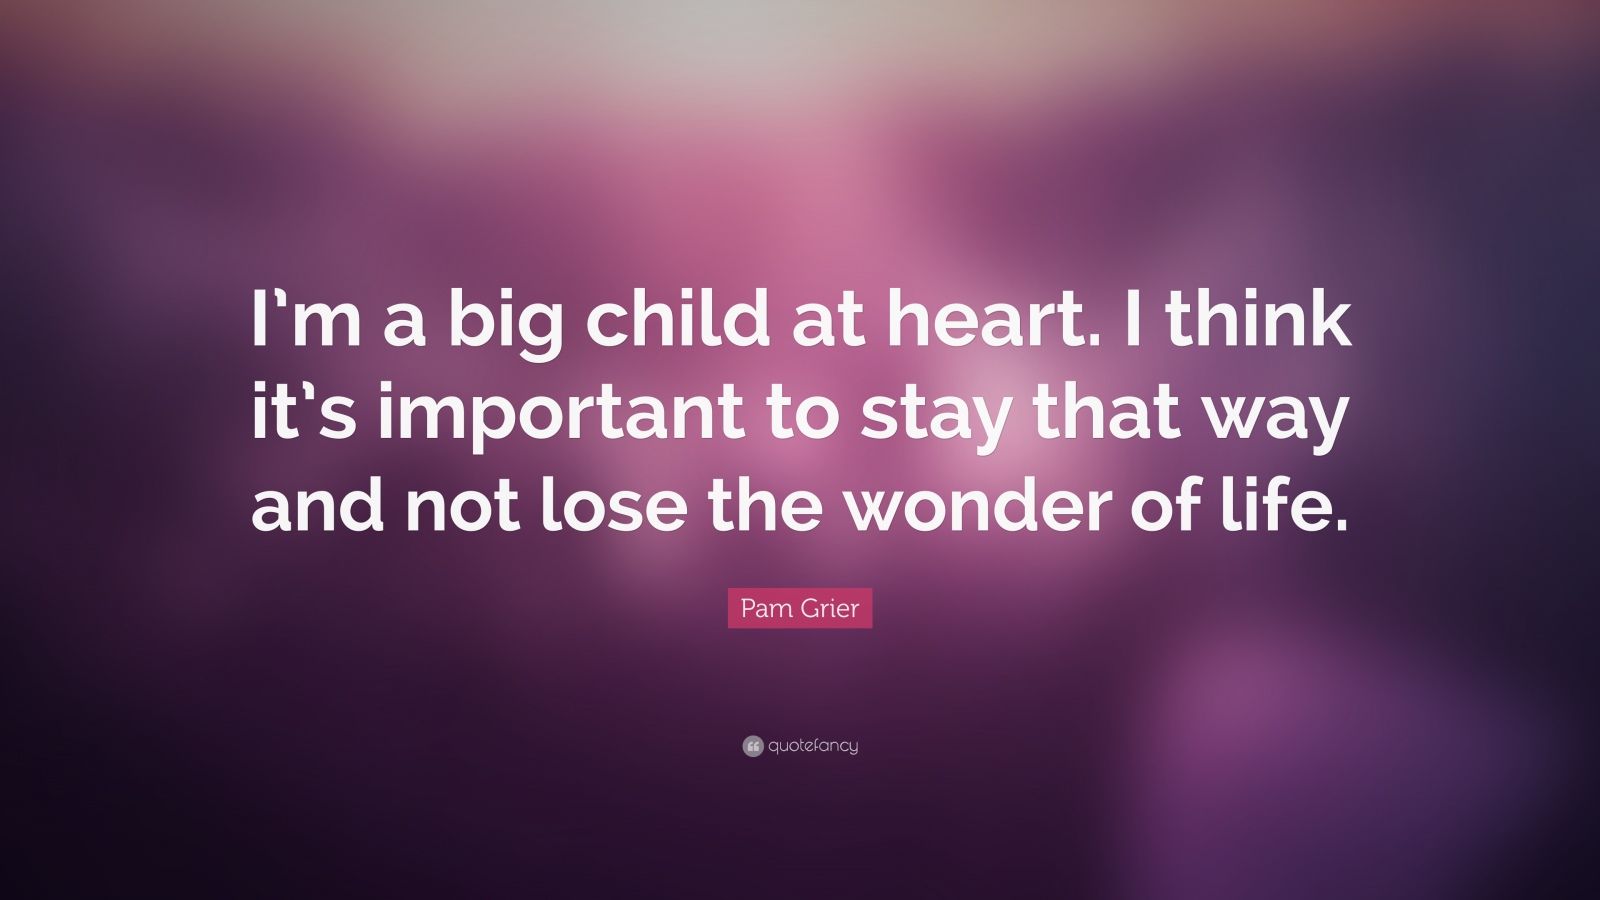 Pam Grier Quote: “I’m a big child at heart. I think it’s important to ...